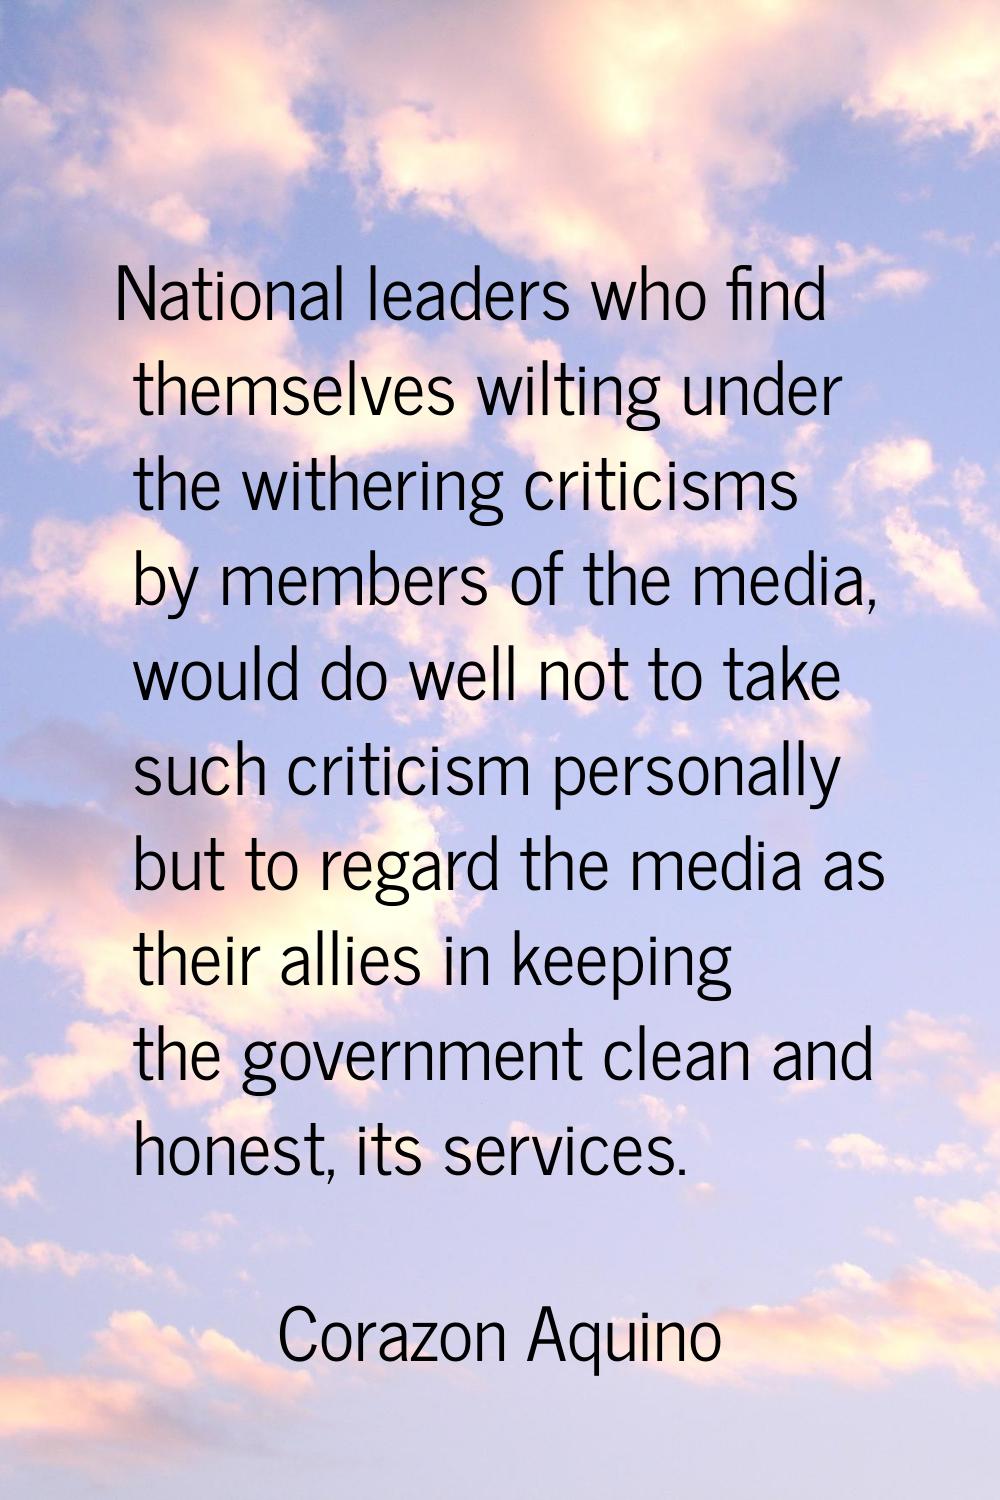 National leaders who find themselves wilting under the withering criticisms by members of the media